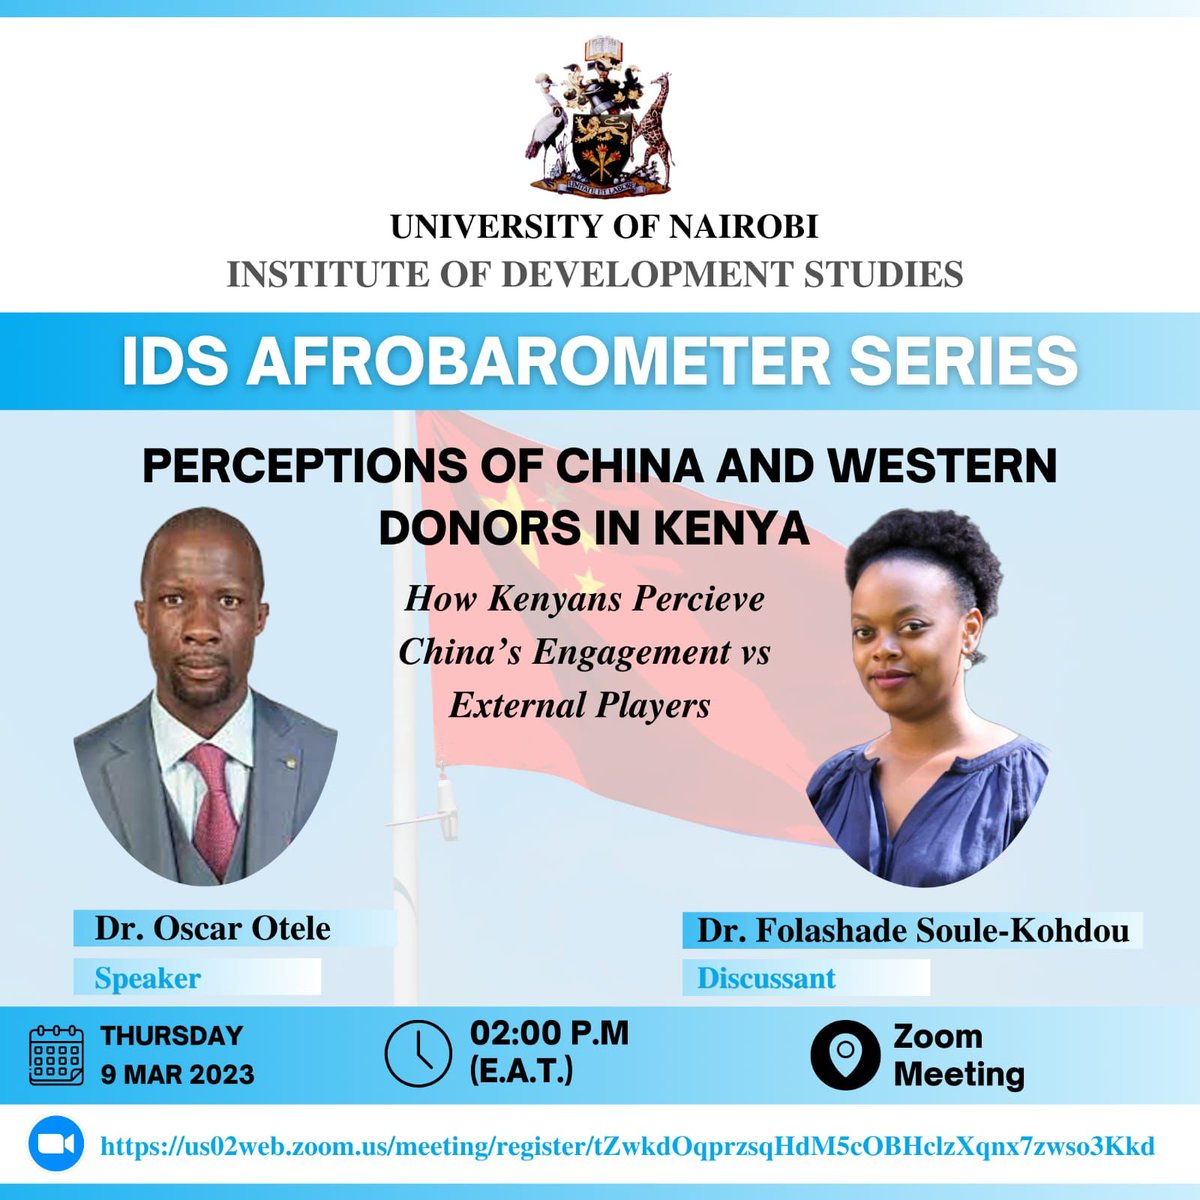 Make sure to join @IDS_UONBI this Thursday, March 9 from 2pm for an engaging discussion on how Kenyans perceive China's engagement Vs external players.
@Otele_Oscar will be the speaker and @folasoule the discussant.
#IDSUoNResearch
#IDSAfrobarometerseries
#IsChinaPreferred?